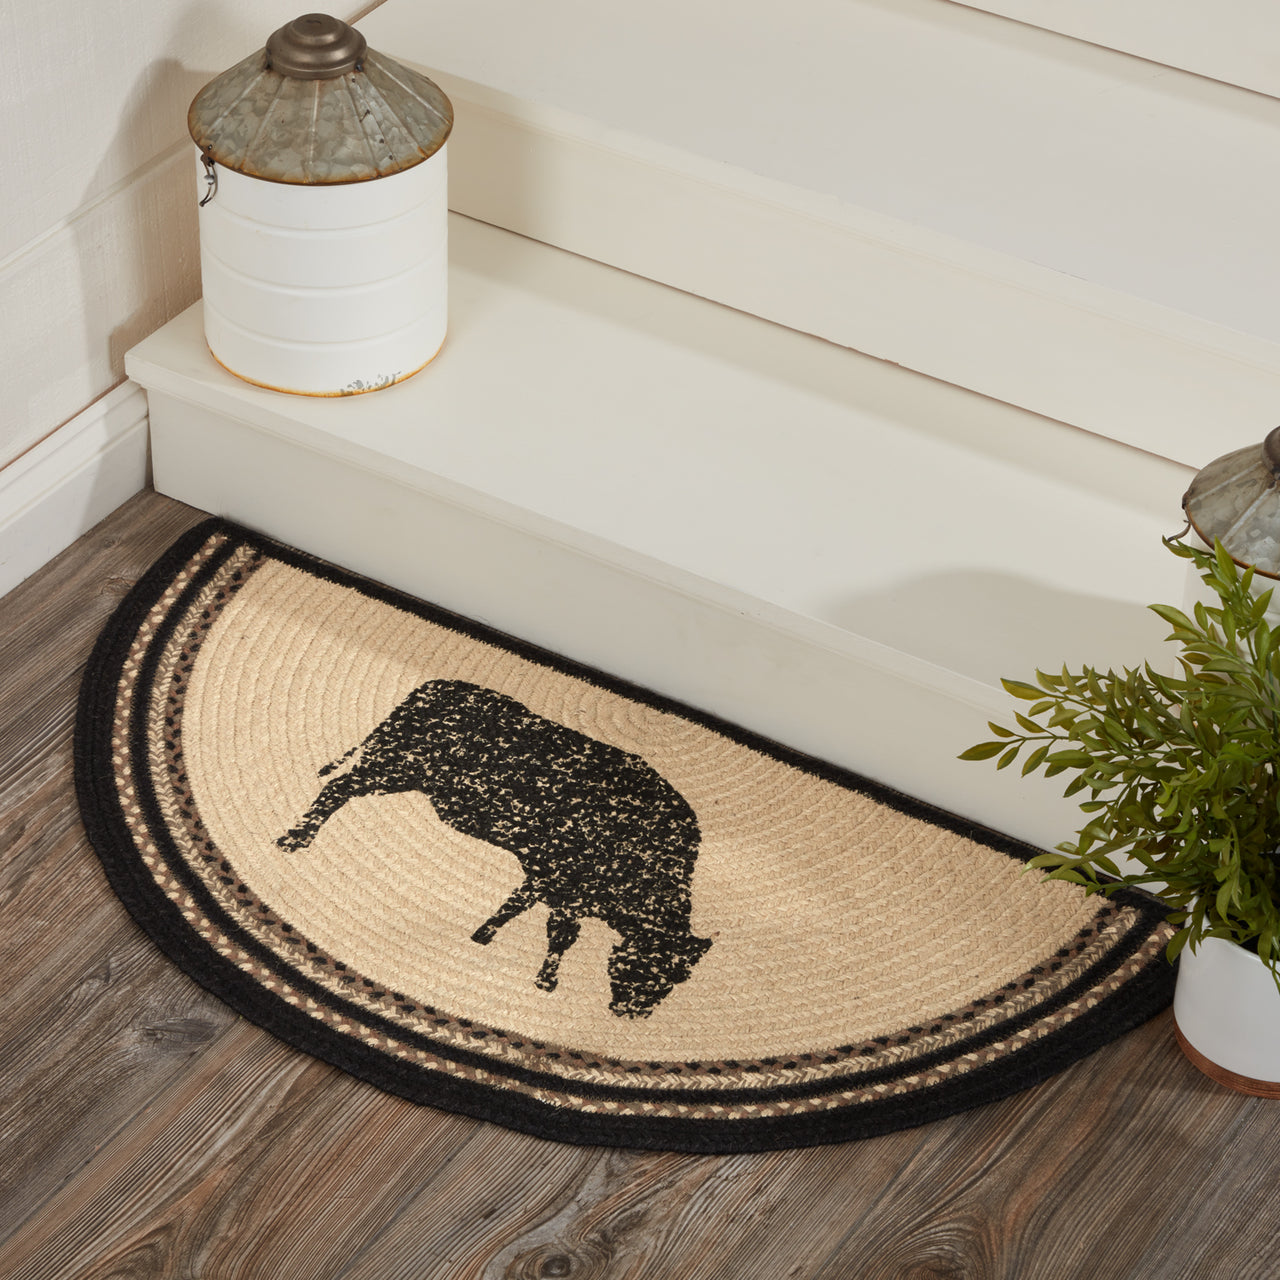 Sawyer Mill Charcoal Cow Jute Braided Rug Half Circle 16.5"x33" with Rug Pad VHC Brands